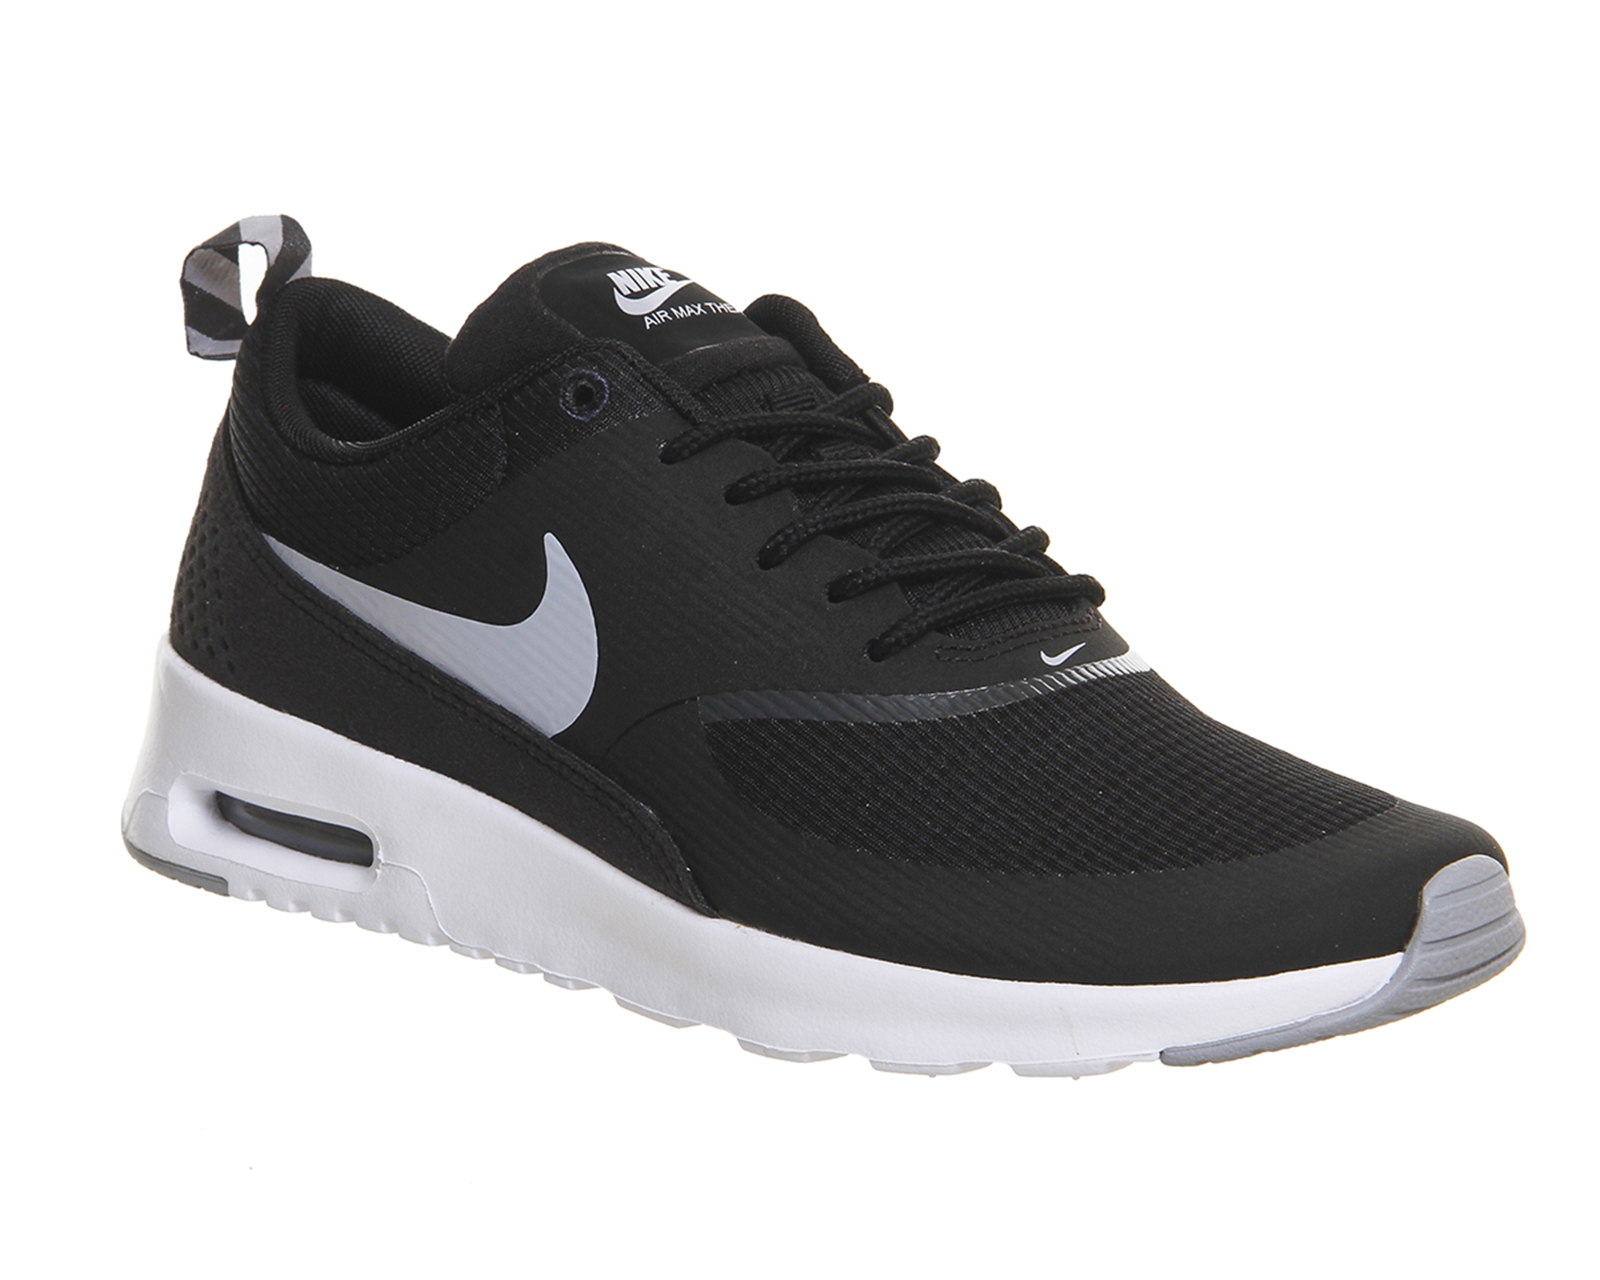 Nike Air Max Thea Black Wolf Grey White - Office Girl